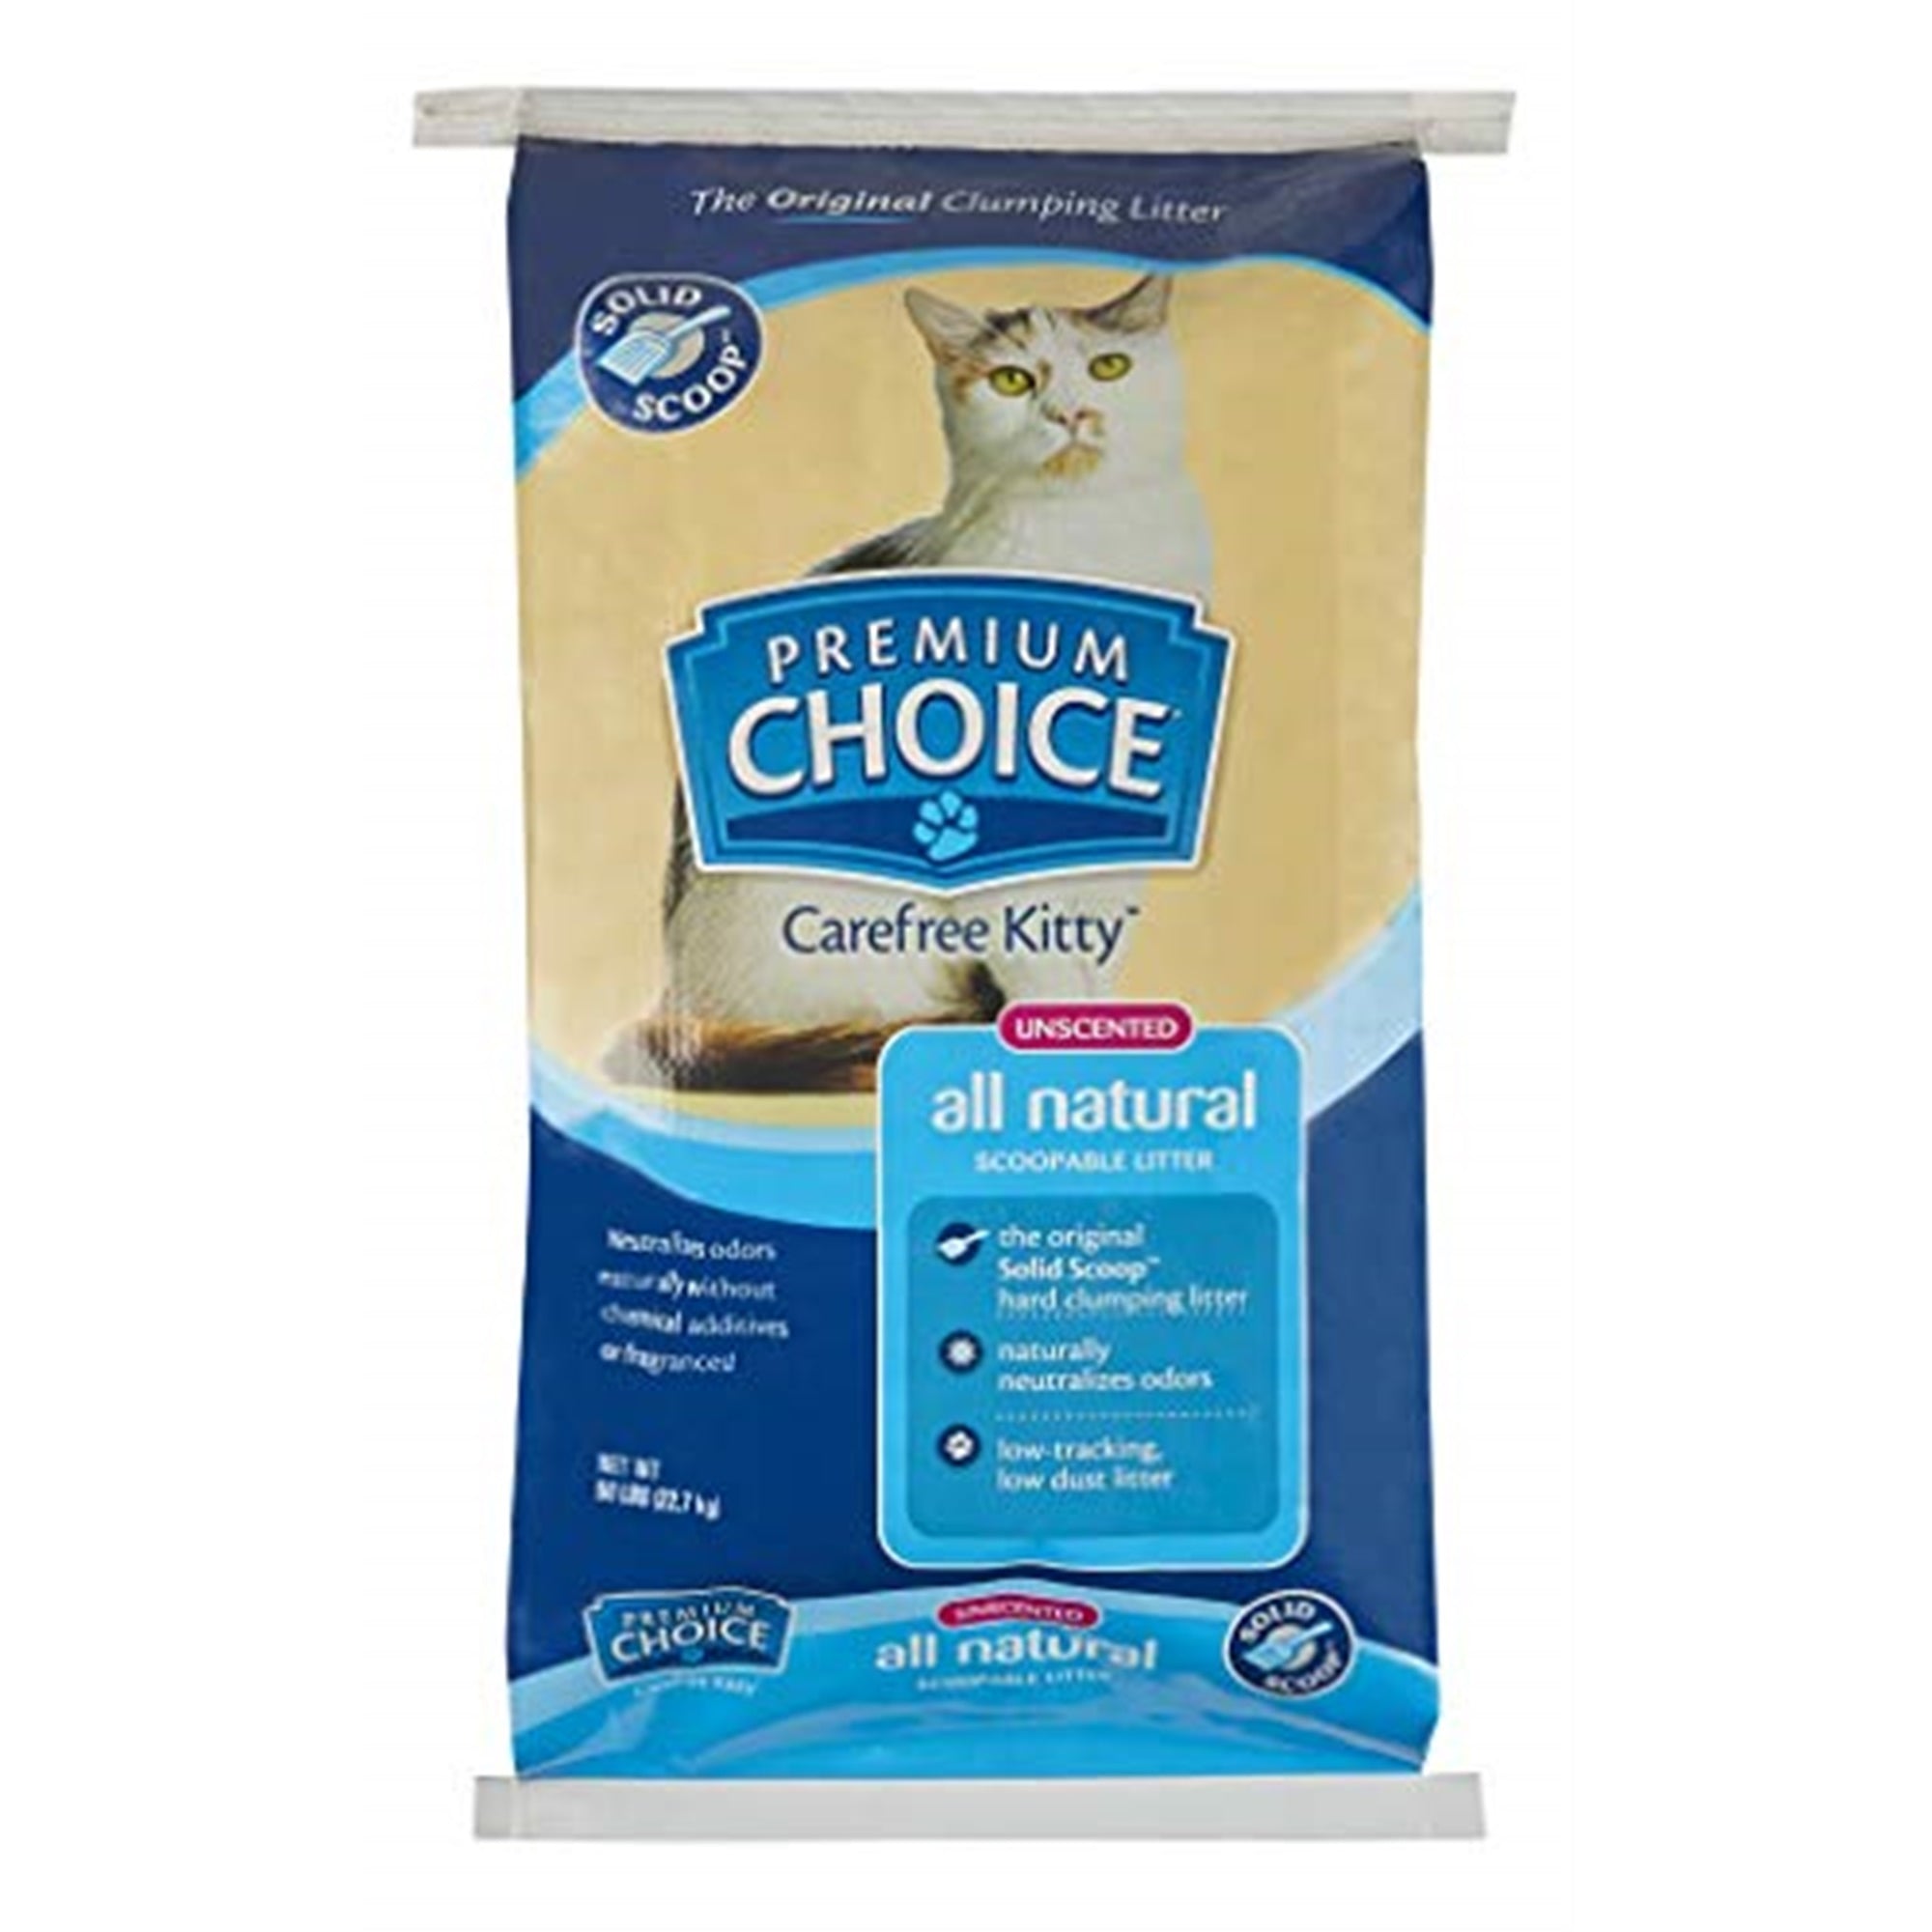 Premium Choice Carefree Kitty Unscented All-Natural Clumping Cat Litter - 50lb Bag